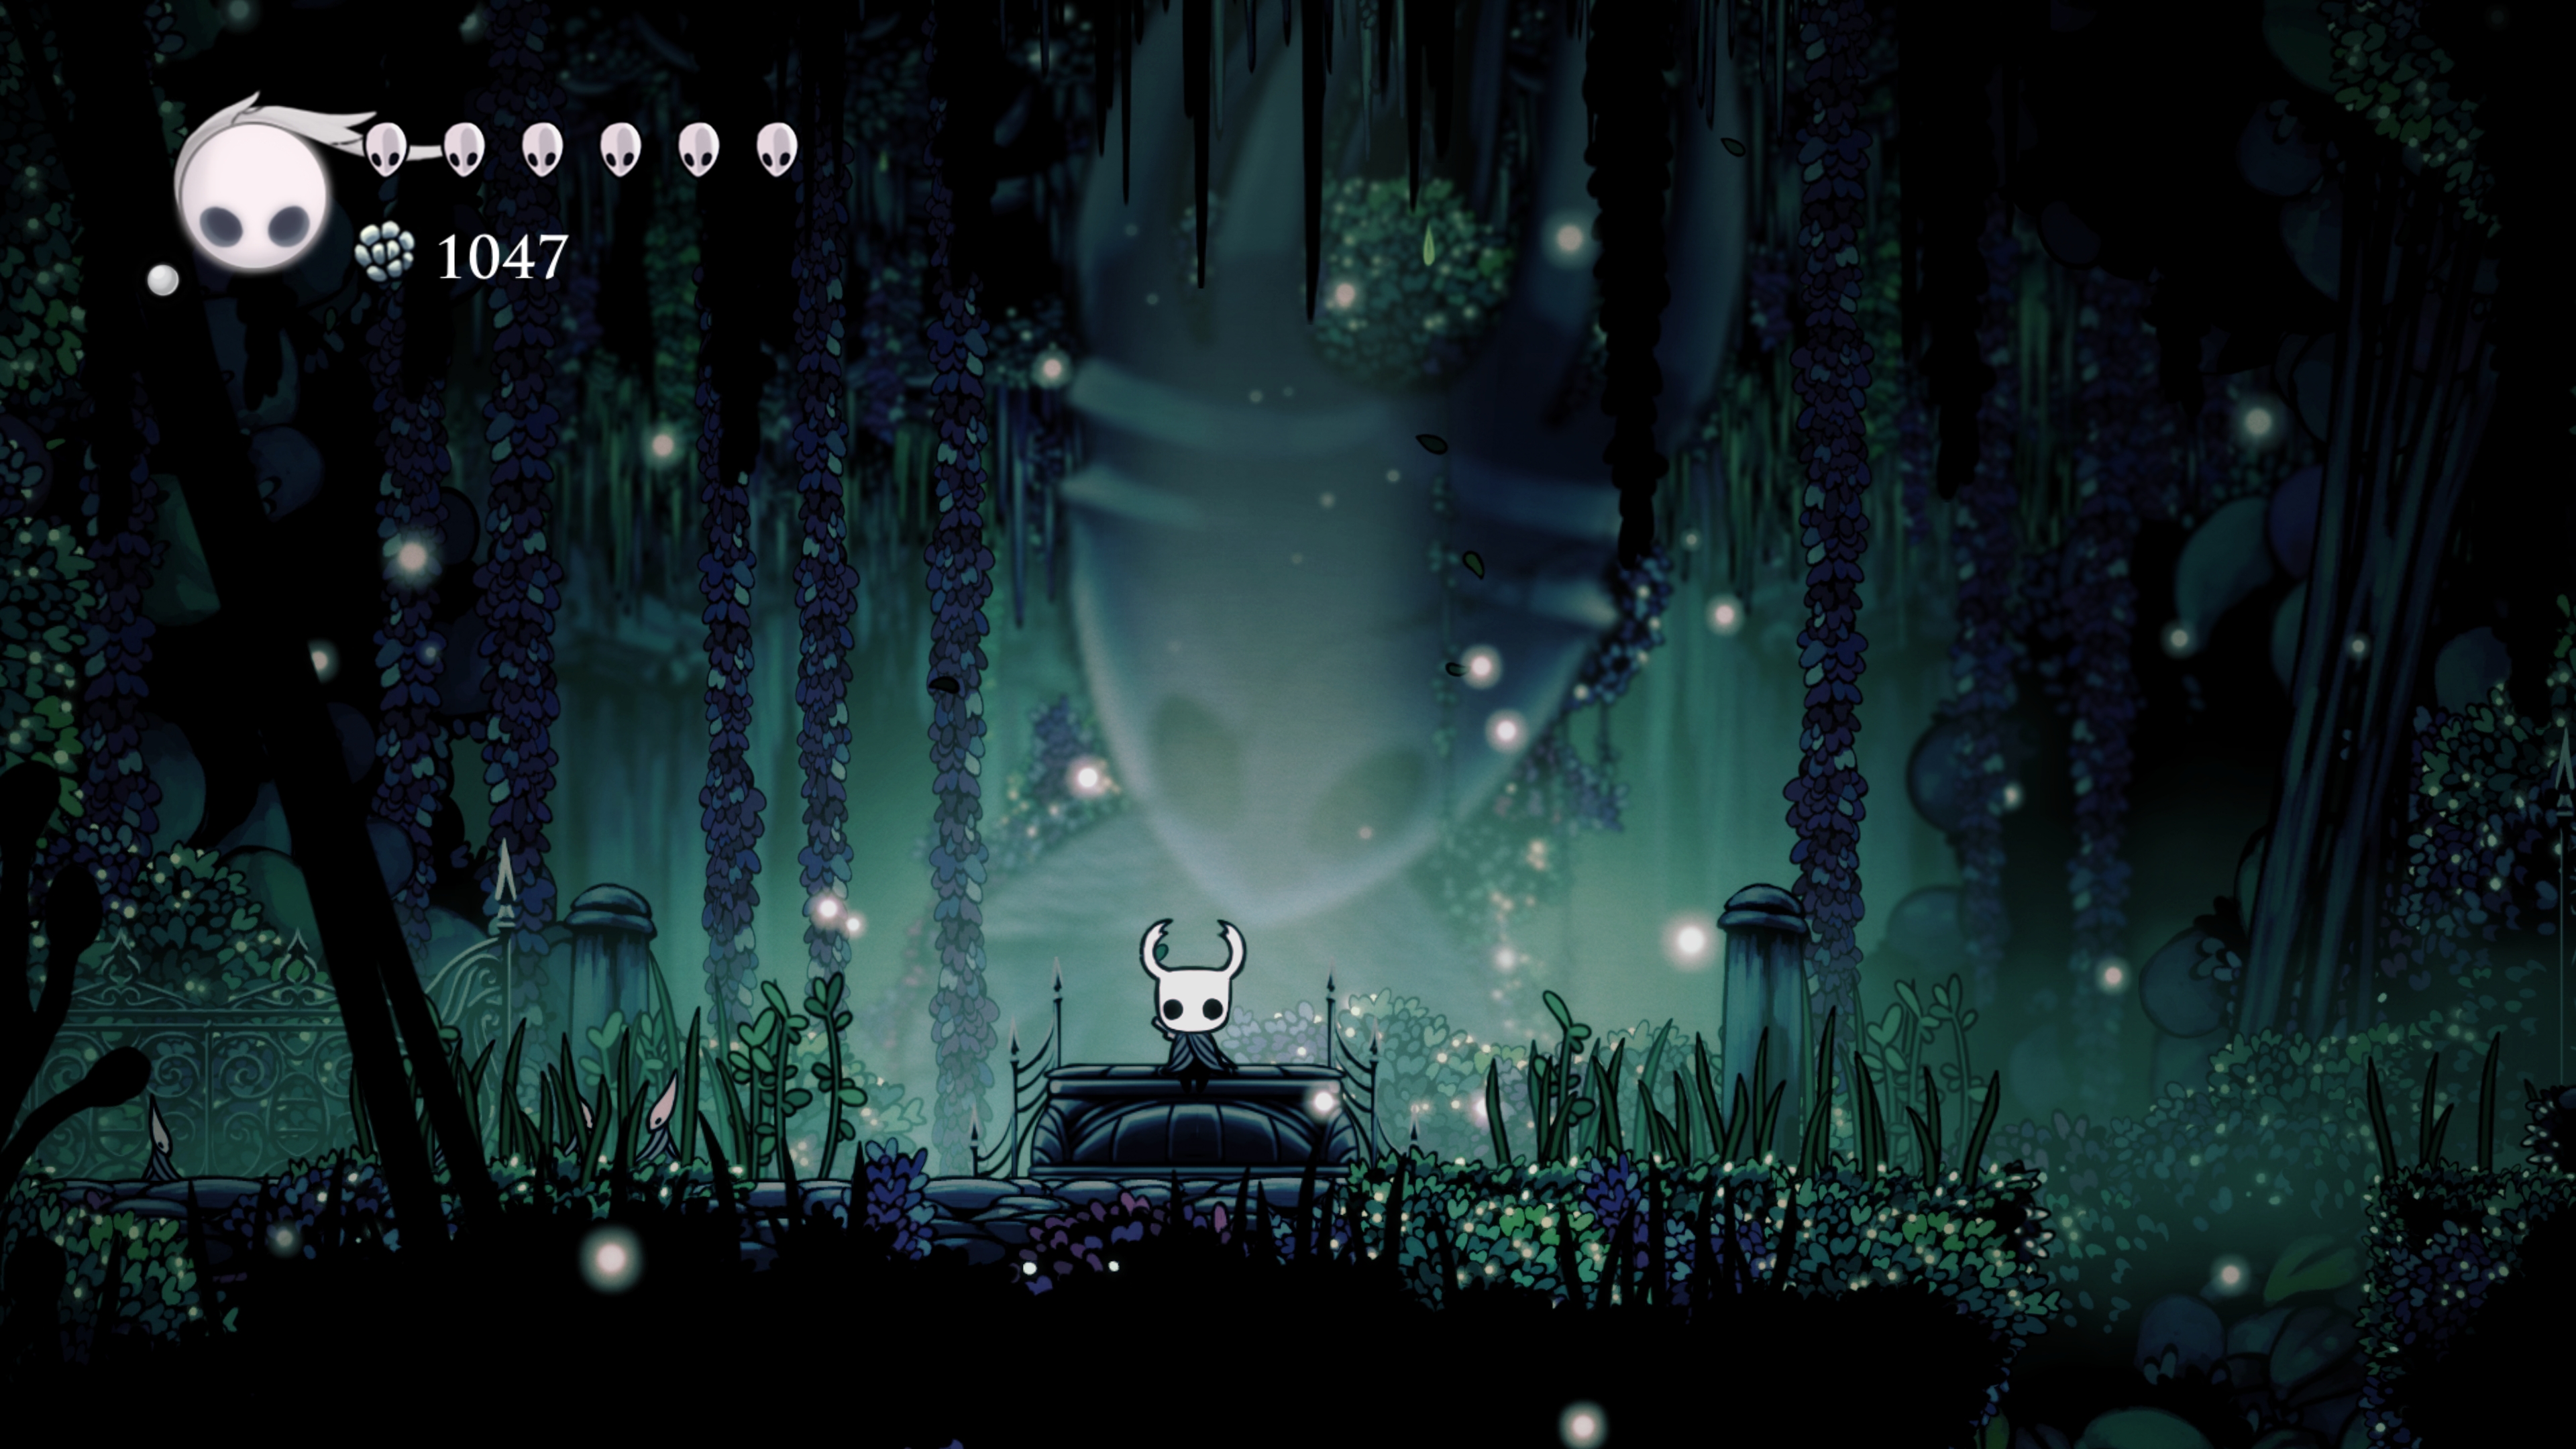 hollow knight, video game